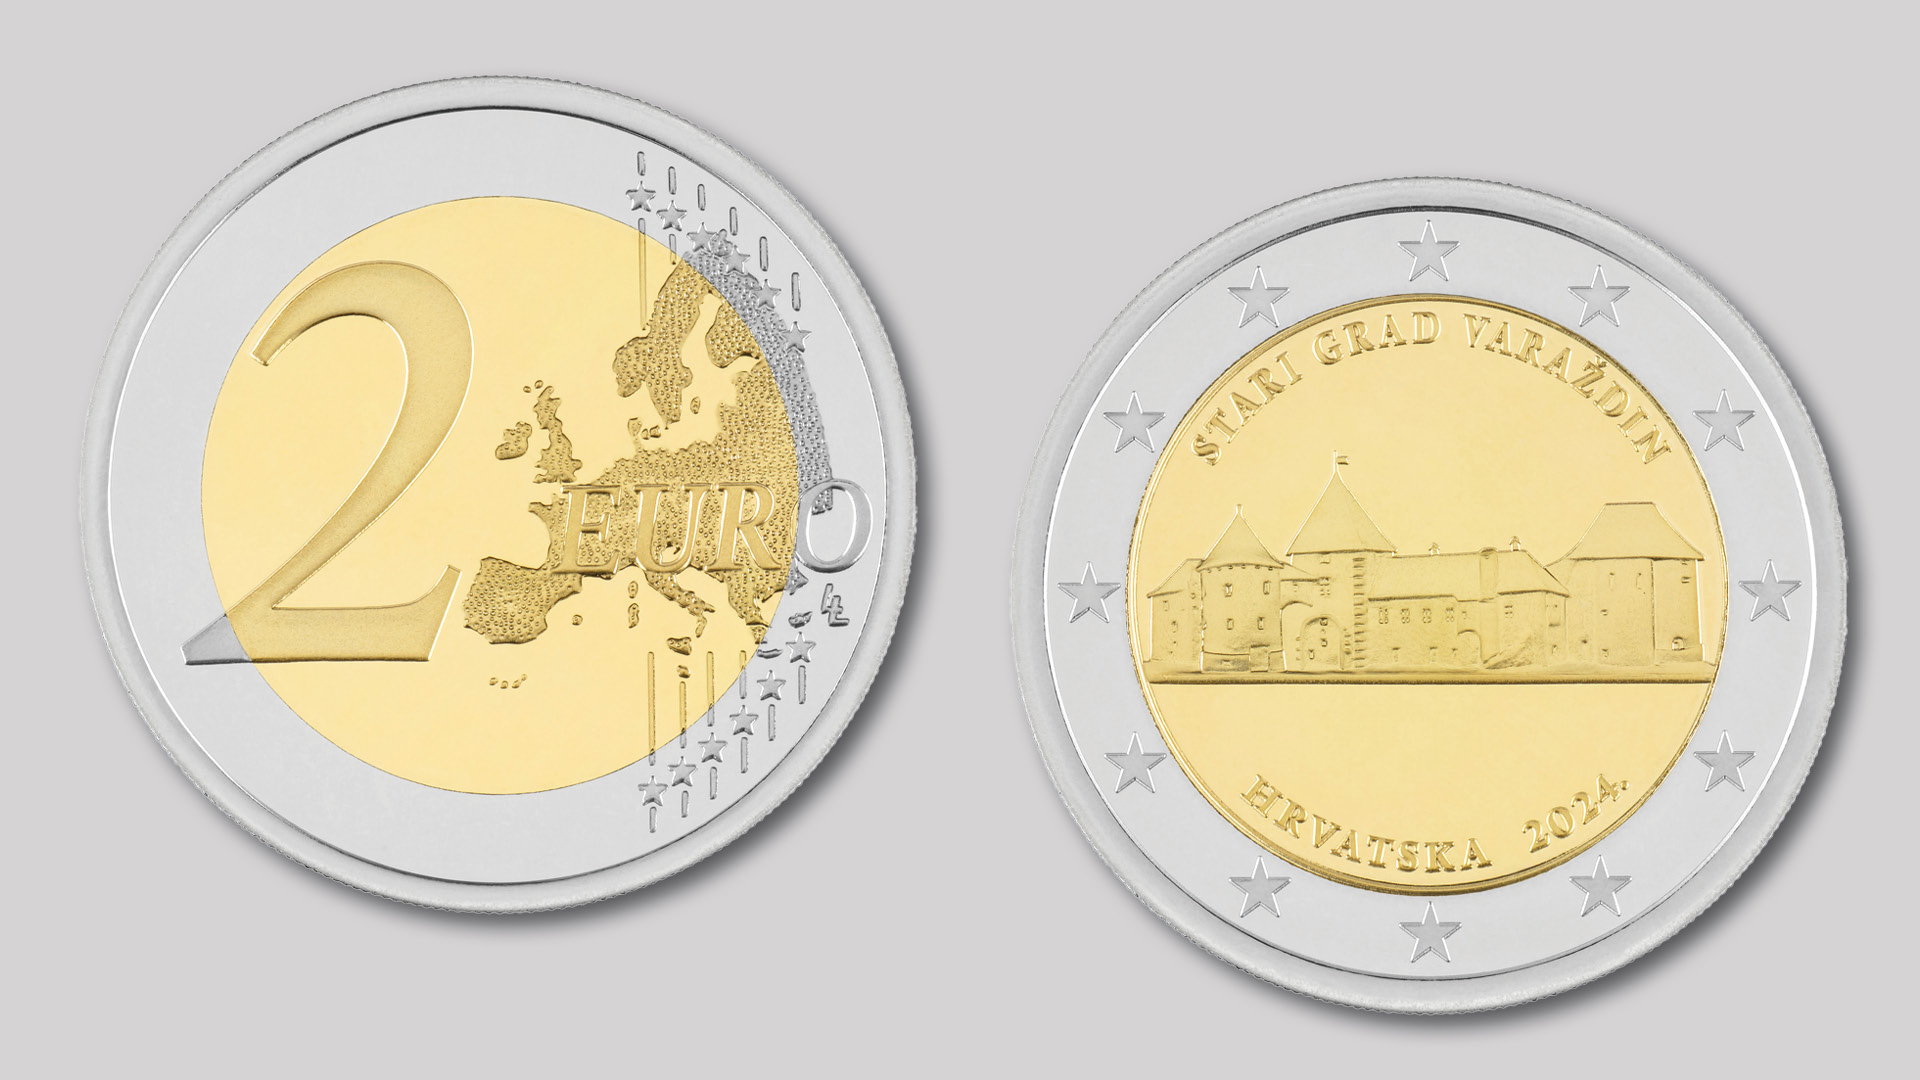 CNB issues the commemorative 2-euro circulation coin